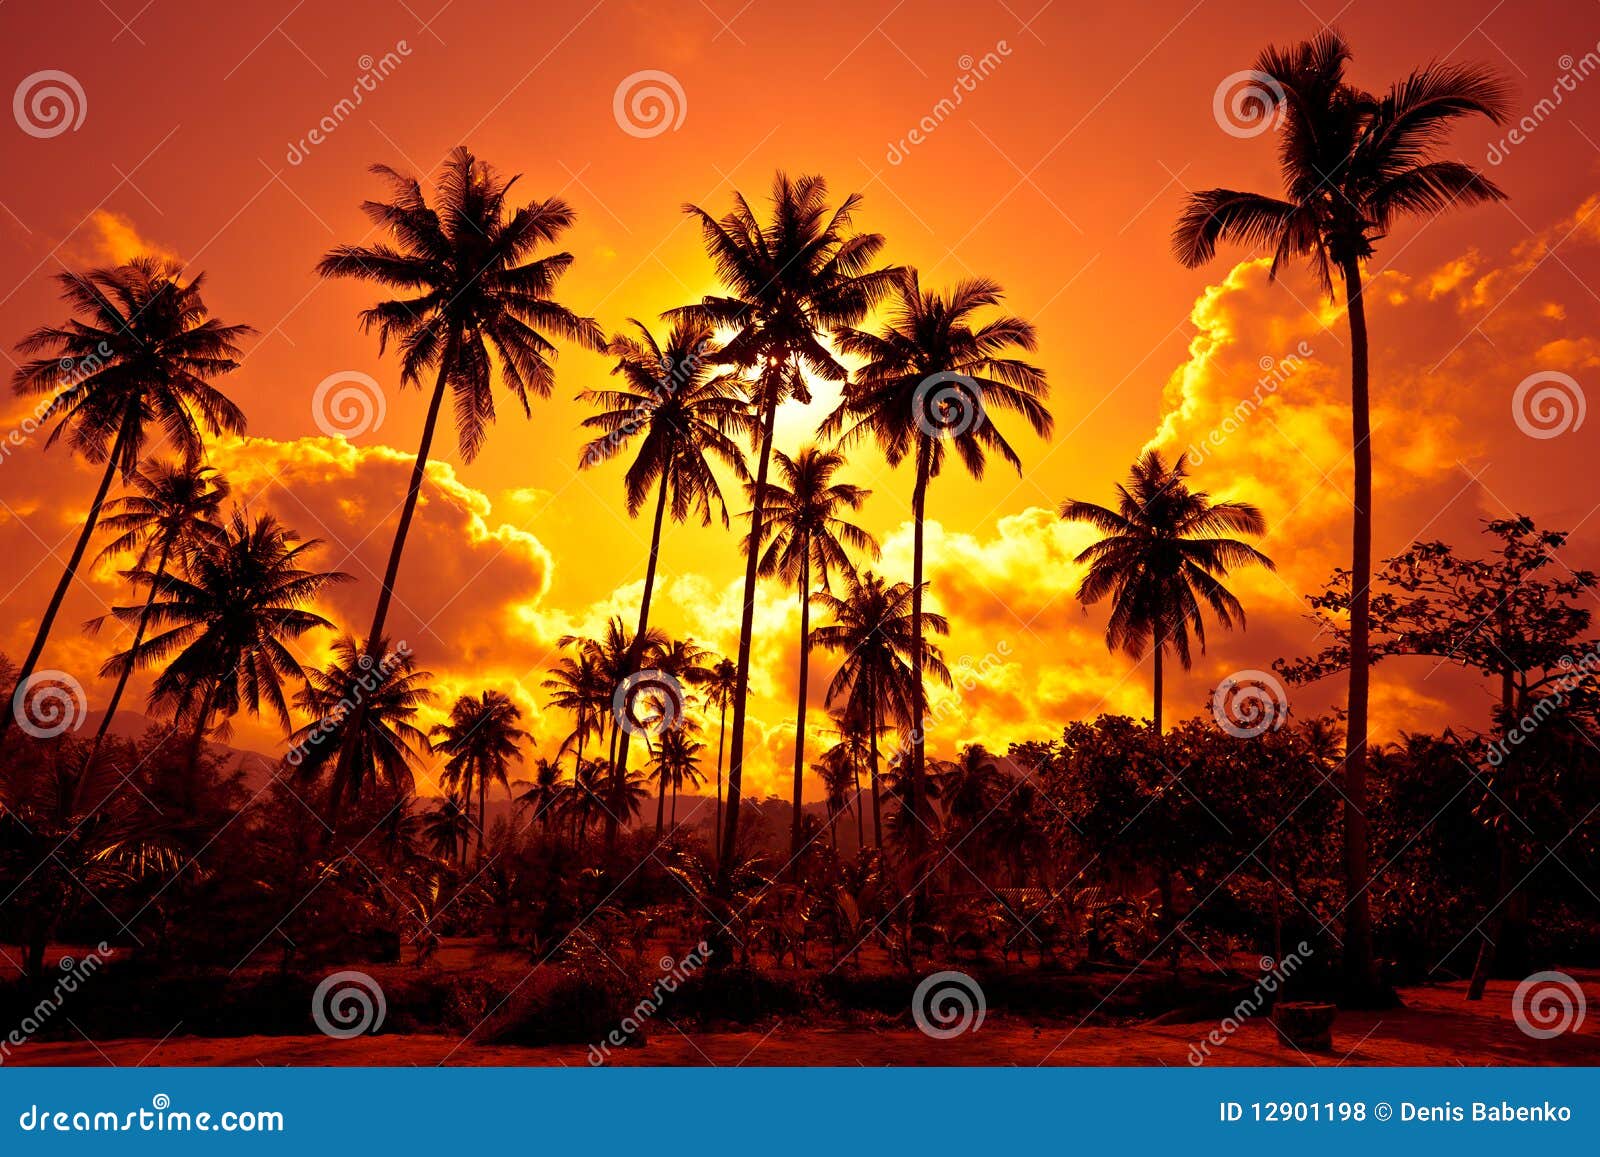 coconut palms on sand beach in tropic on sunset